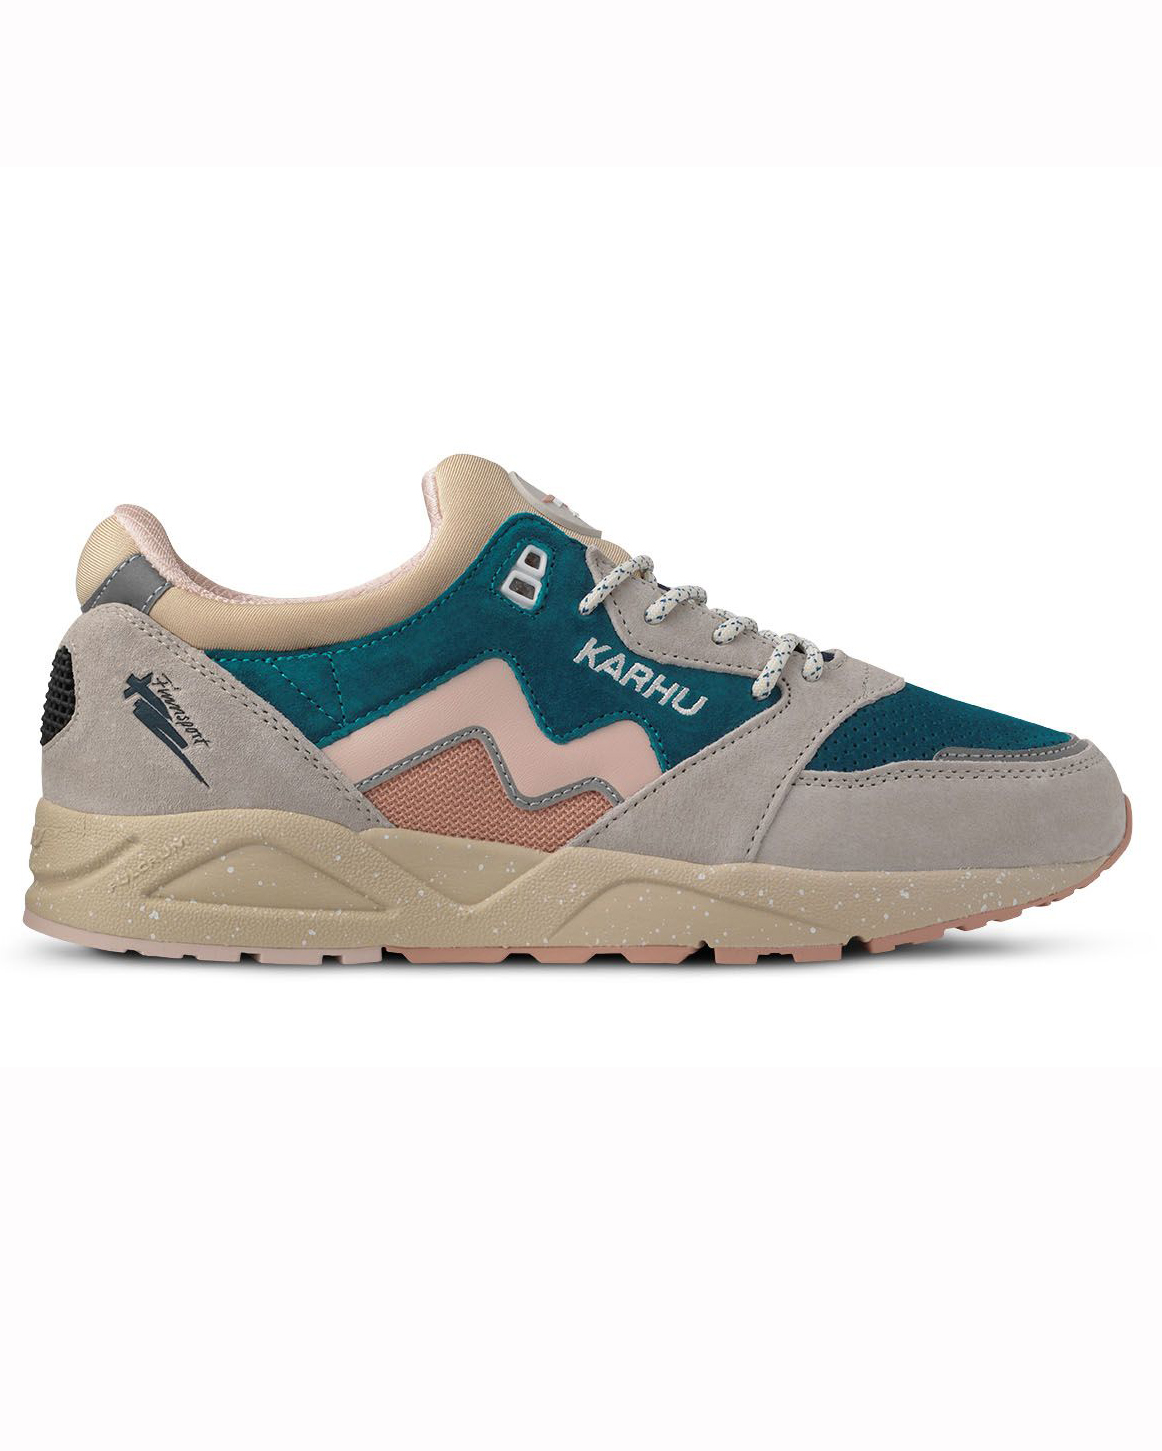 Sneakers Aria 95 - Silver Lining/ Peach Whip  - 40